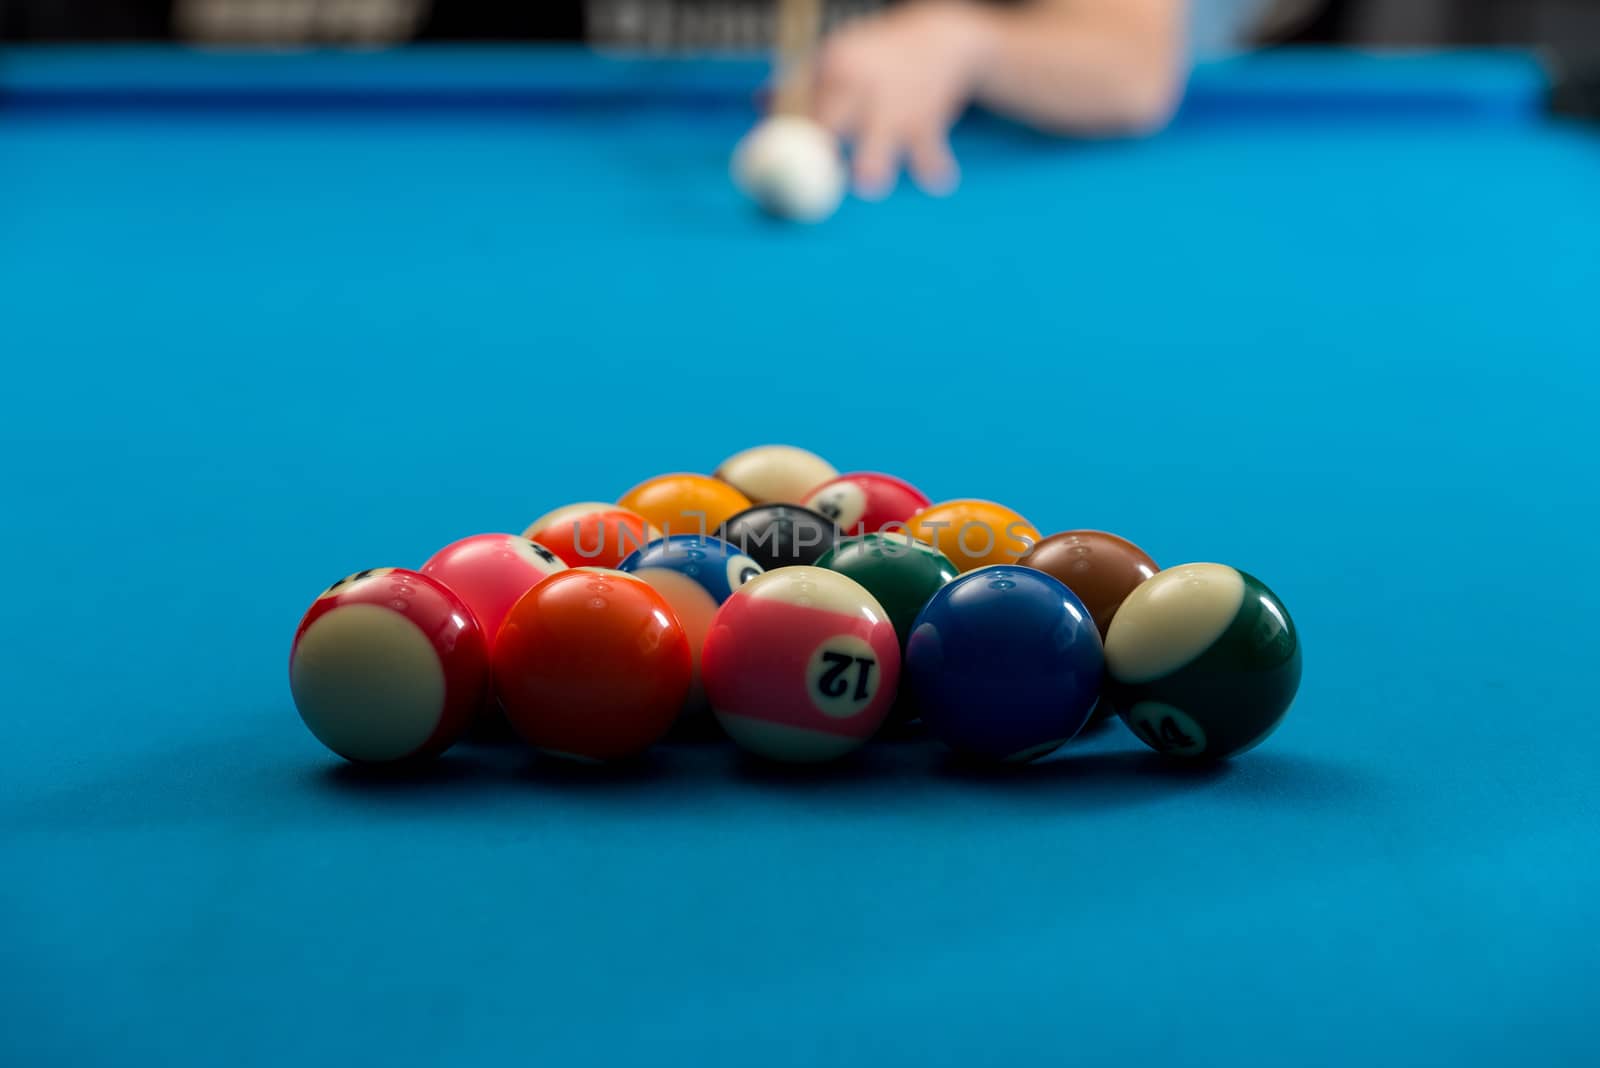 Man Playing Pool About to Hit Ball by JalePhoto